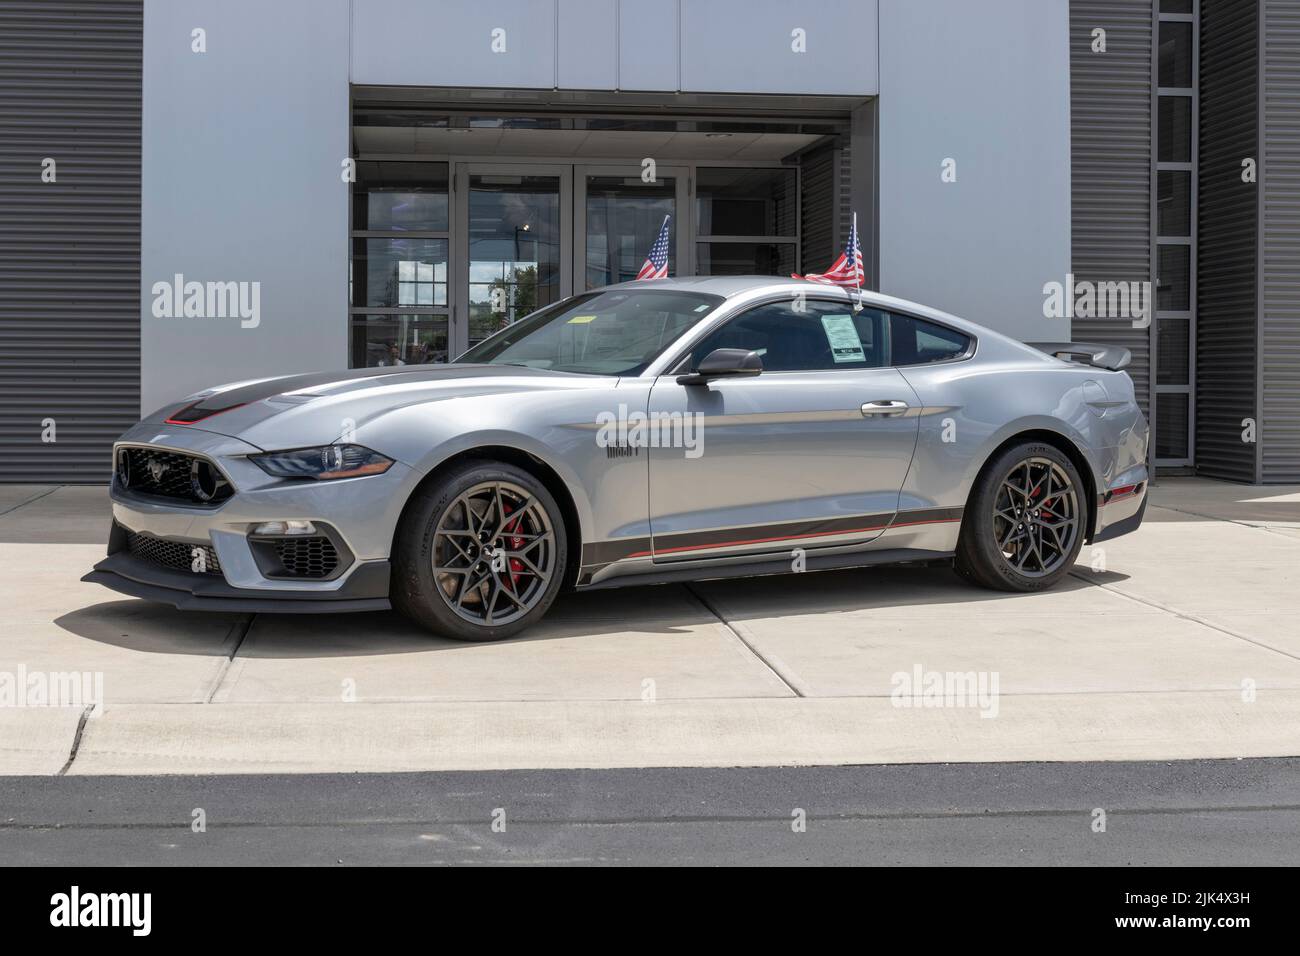 Plainfield - Circa July 2022: Ford Mustang display at a dealership. Mustangs can be ordered in a base model, GT, Mach 1 or Shelby GT500. Stock Photo